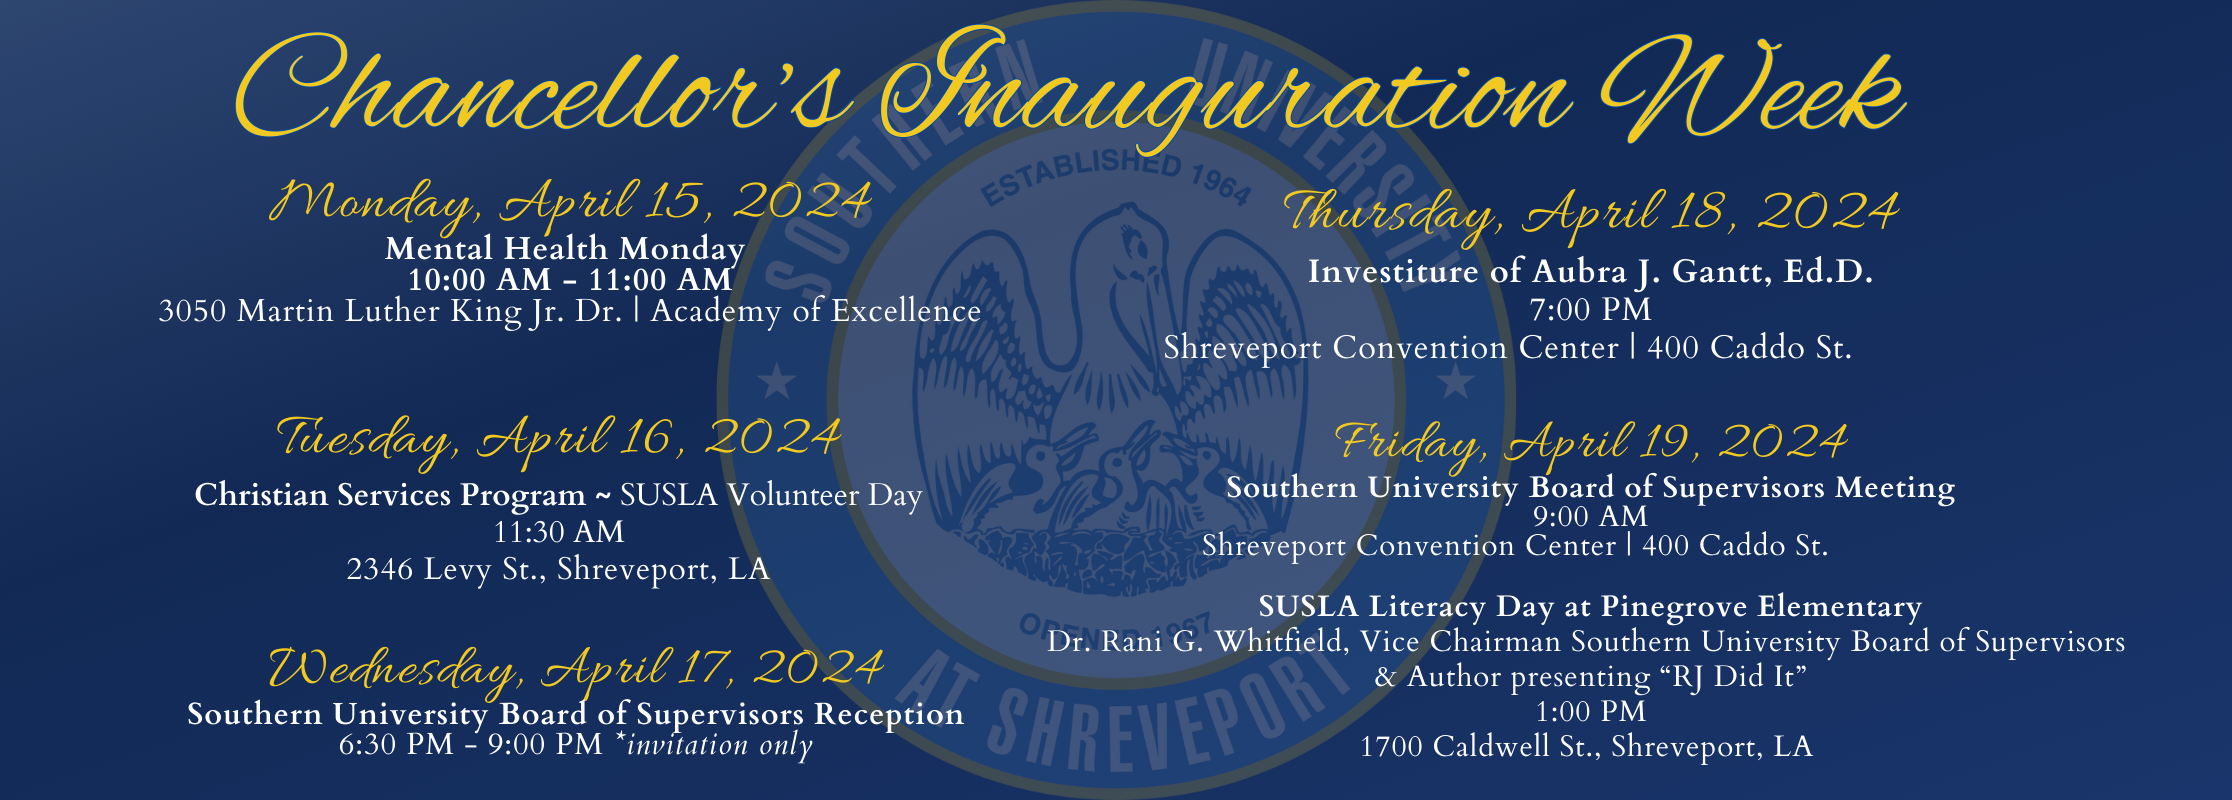 Chancellor's Inauguration Week Banner announcing dates of events